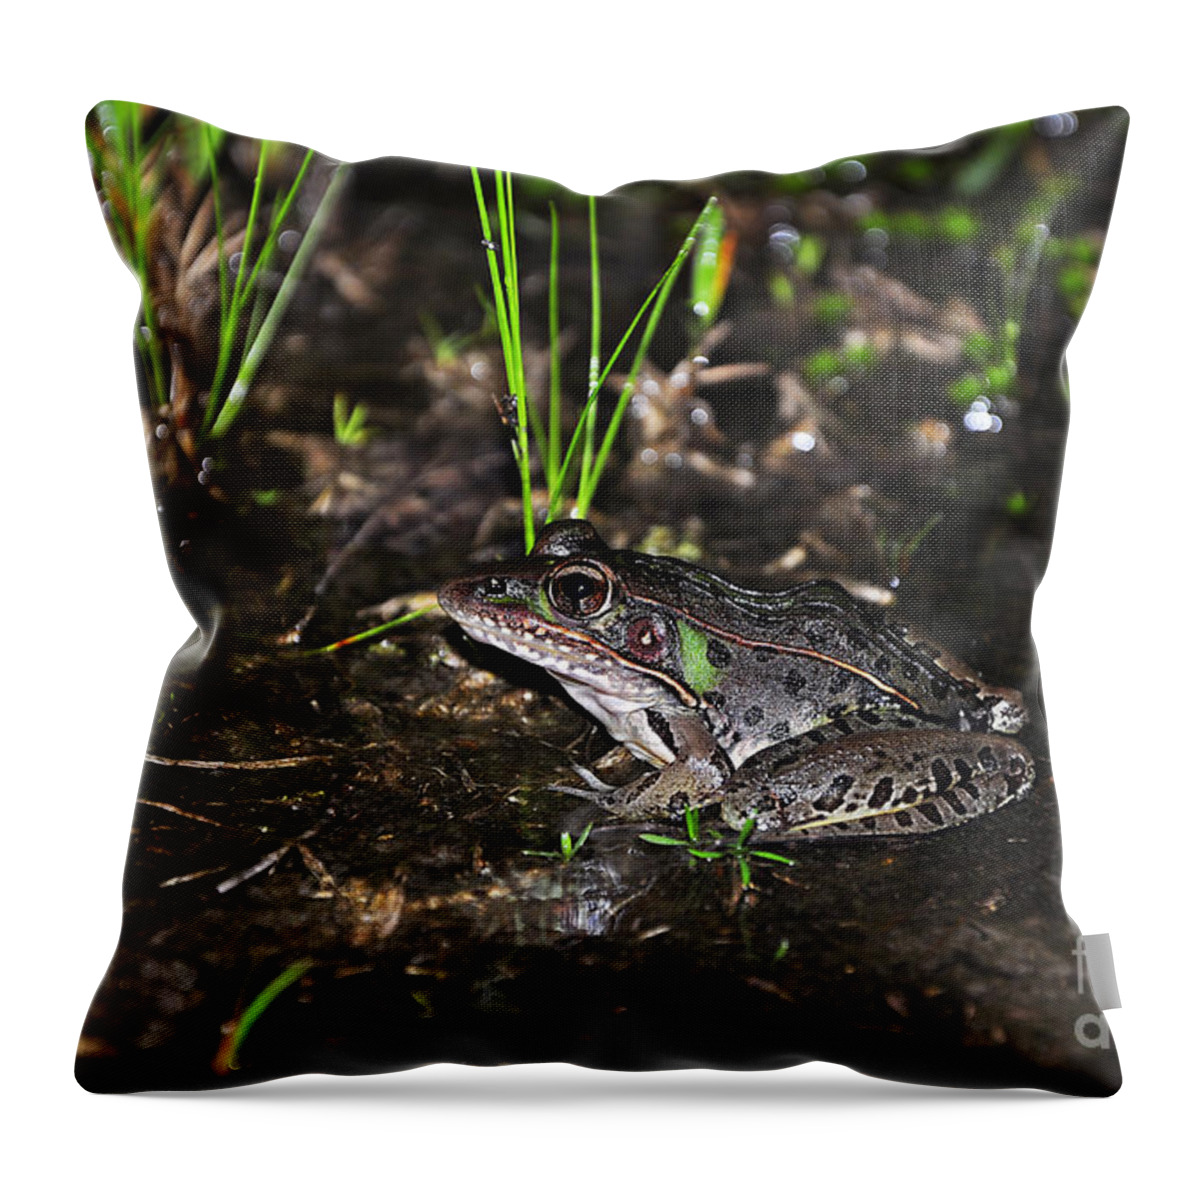 Frog Throw Pillow featuring the photograph Southern Leopard Frog by Al Powell Photography USA